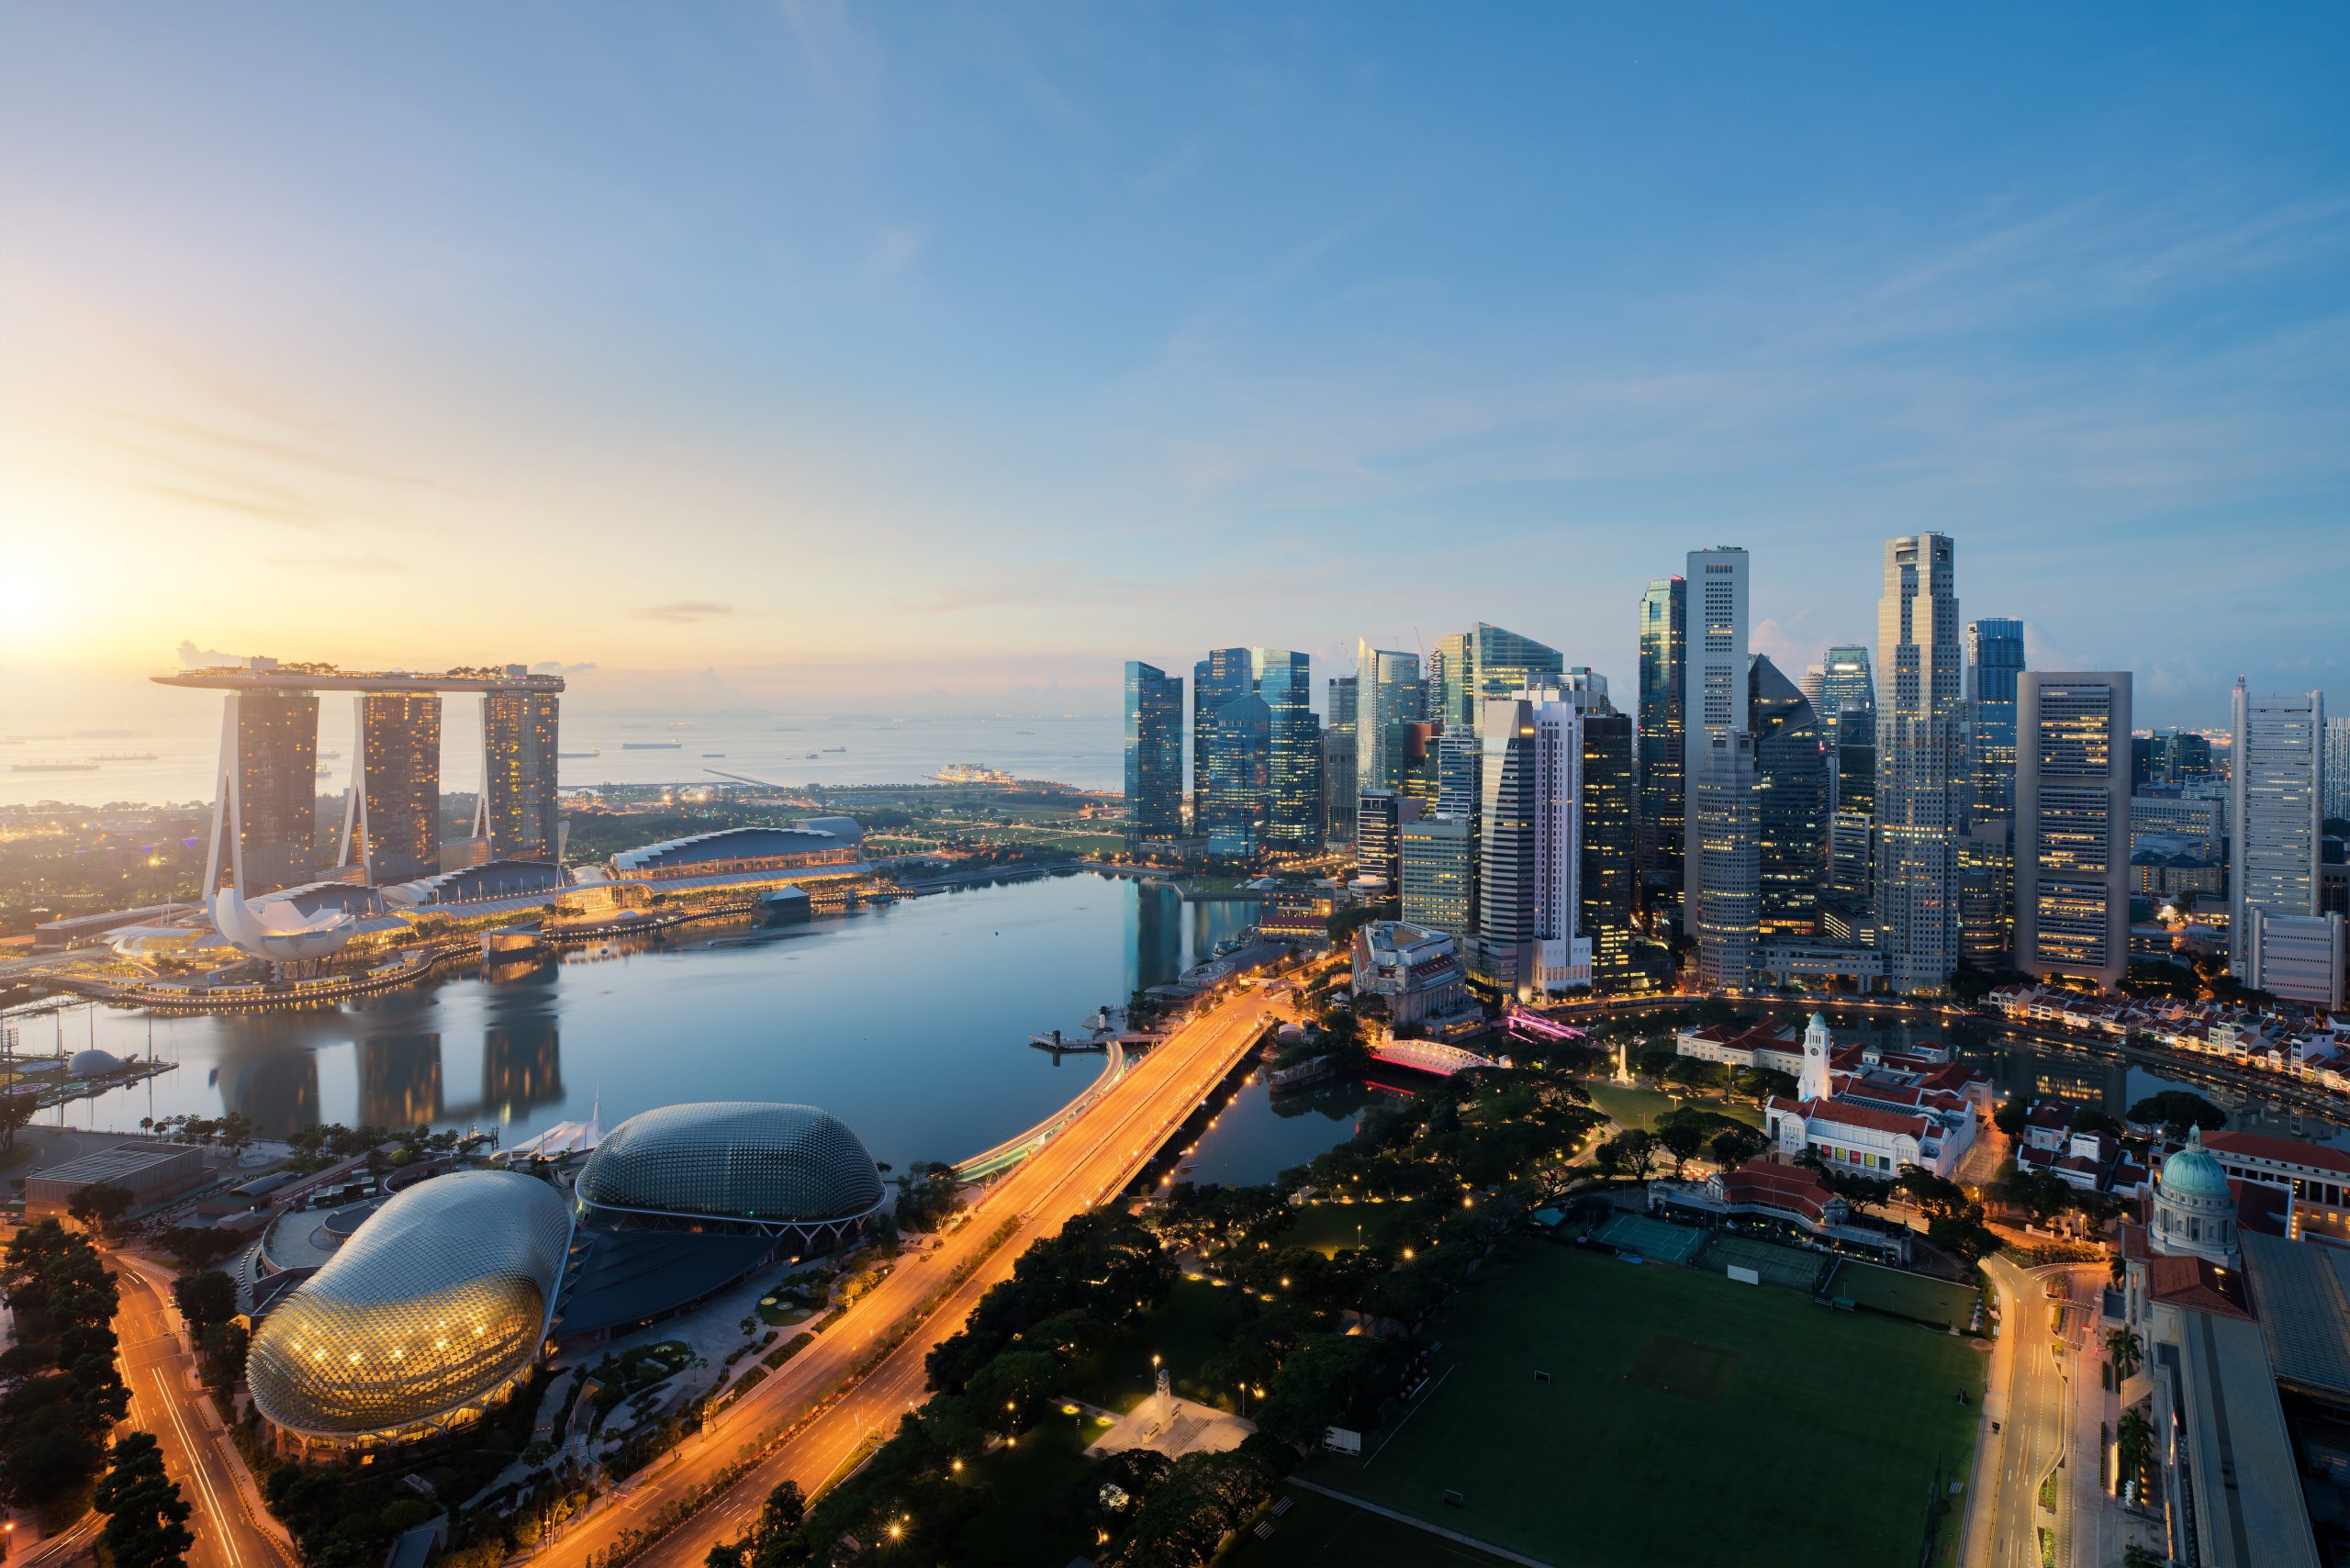 Visit exciting Singapore then cruise onboard Queen Mary 2 to Sydney from $210 per night